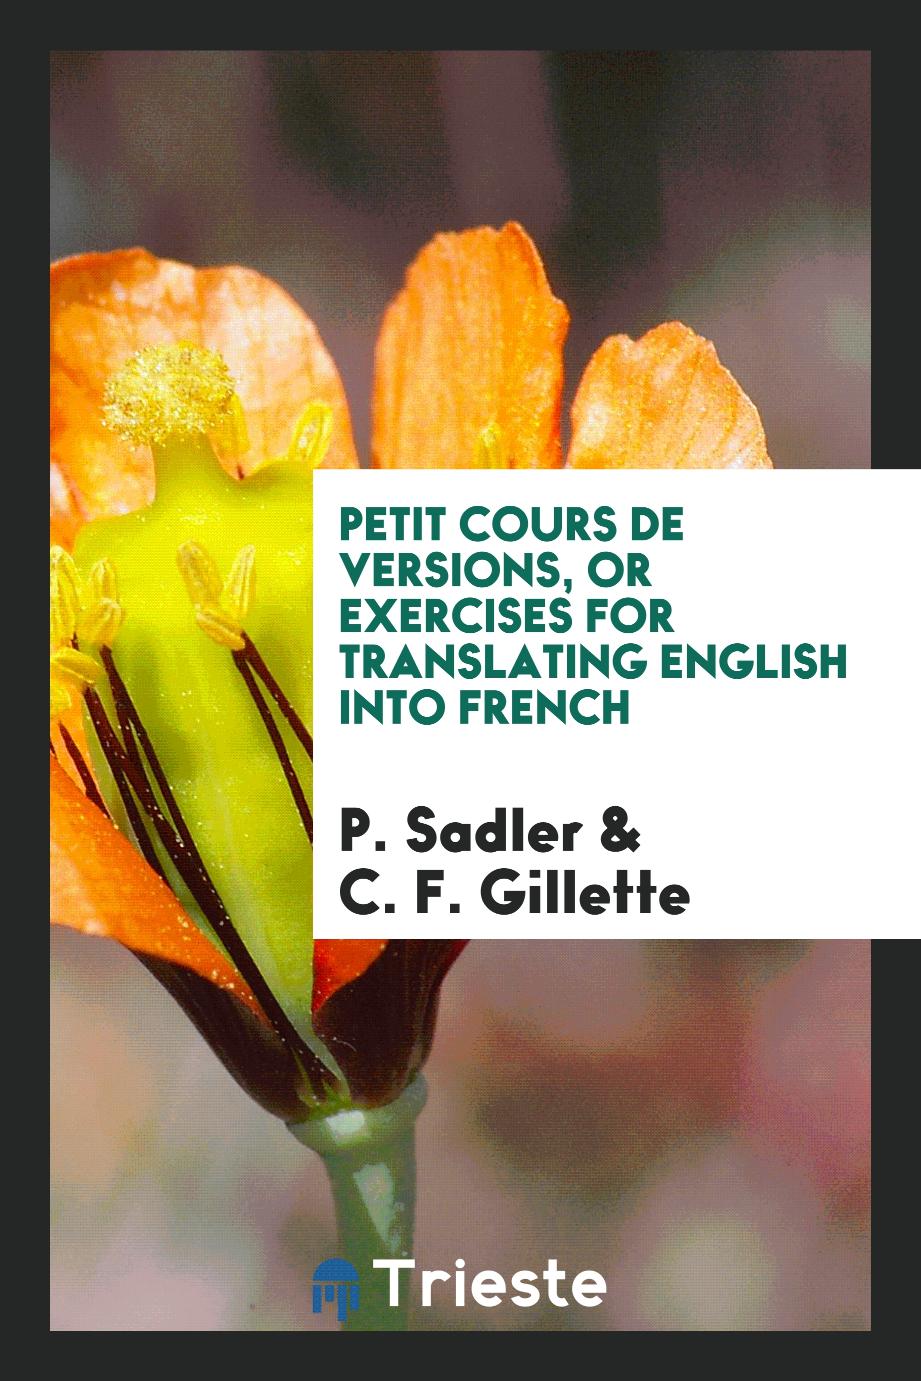 Petit Cours De Versions, or Exercises for Translating English into French